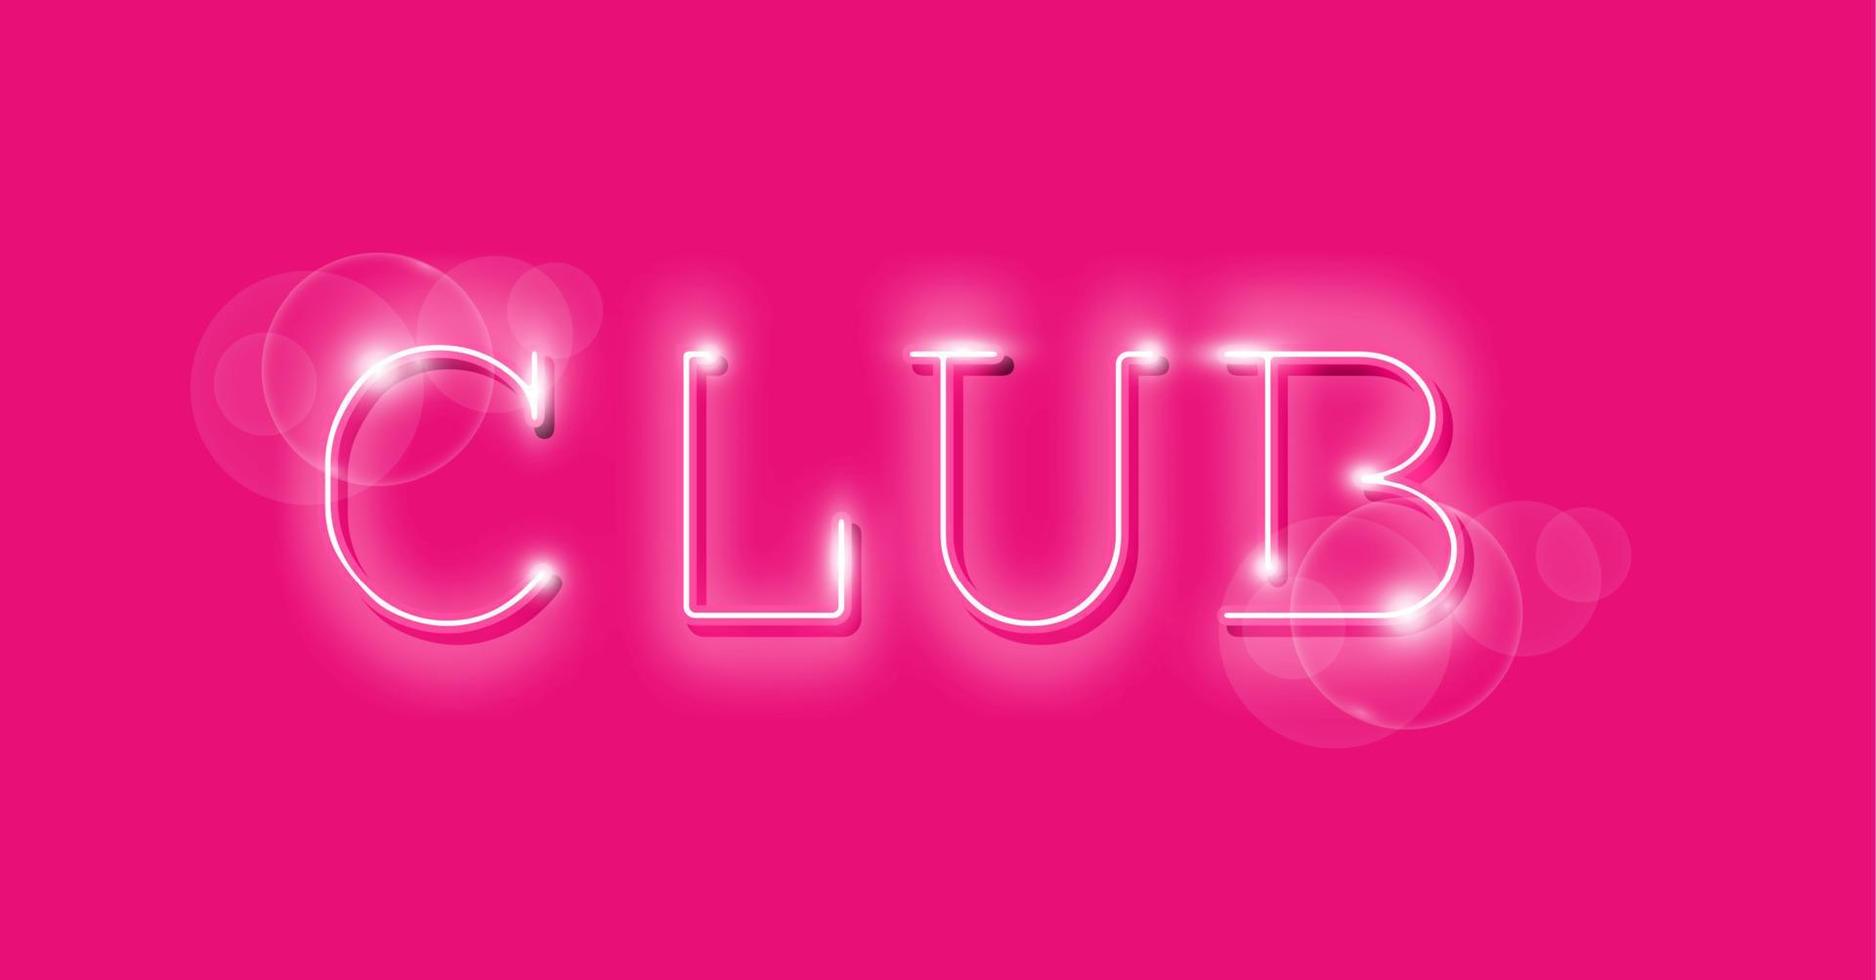 Club Neon Sign Vector. Night Club white neon sign design template, light banner, led bright advertisement, glamour light inscription. Vector illustration isolated on fashion pink background